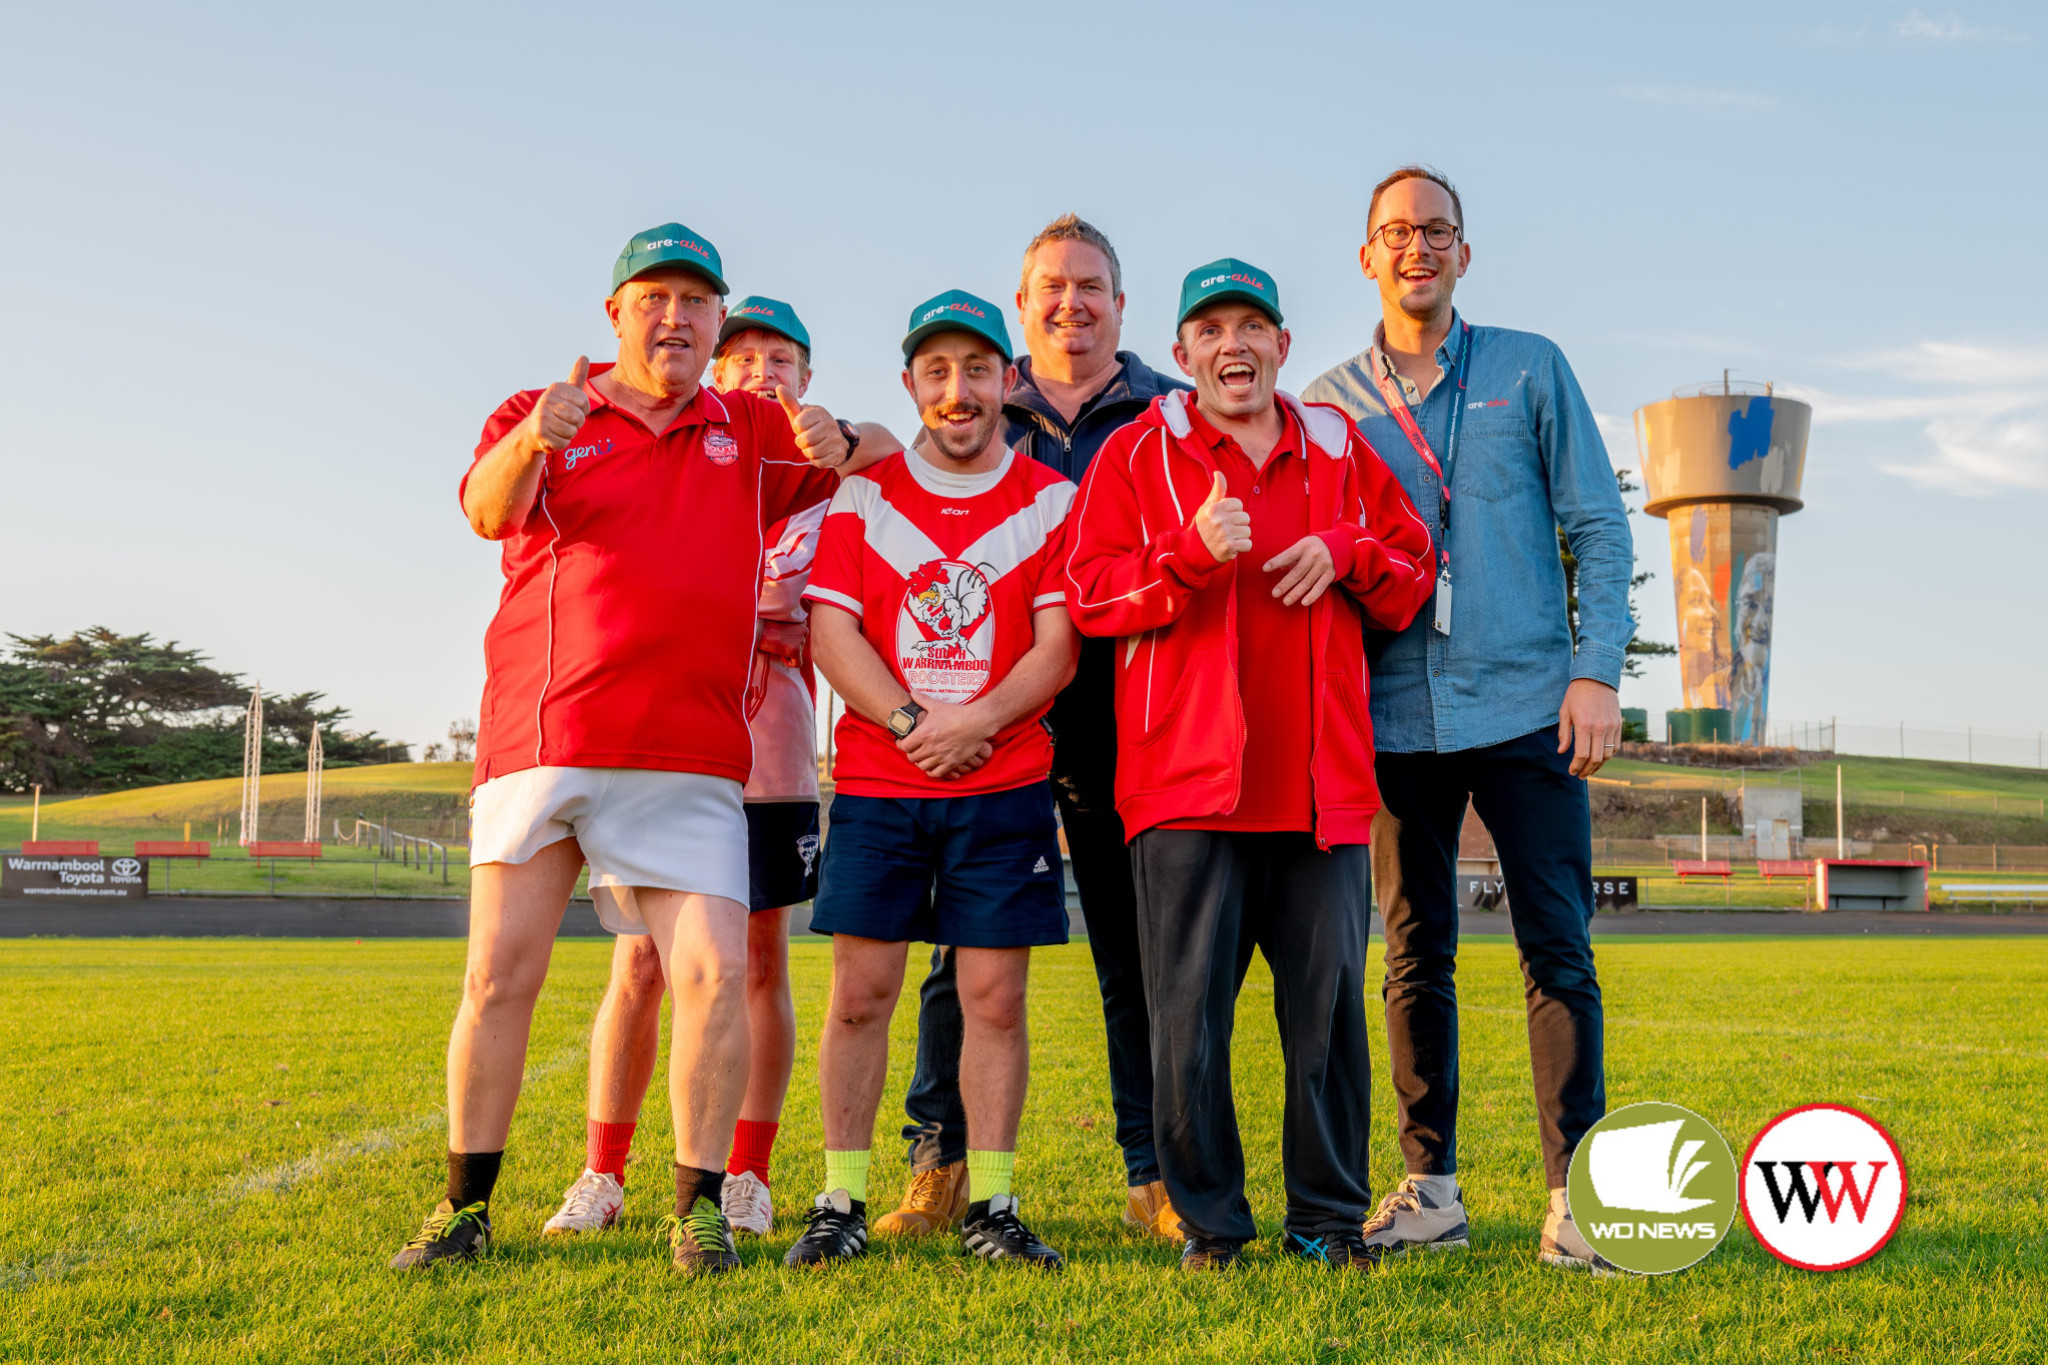 General manager of are-able Social Enterprise Paul Hughes (centre) and marketing and engagement specialist with are-able Nigel Jamison (right) celebrate the union with South Warrnambool Roosters All-Abilities team with team-members Tim Baulch, Kobe Quarrell, Peter Byrne and Tom Leembruggen.